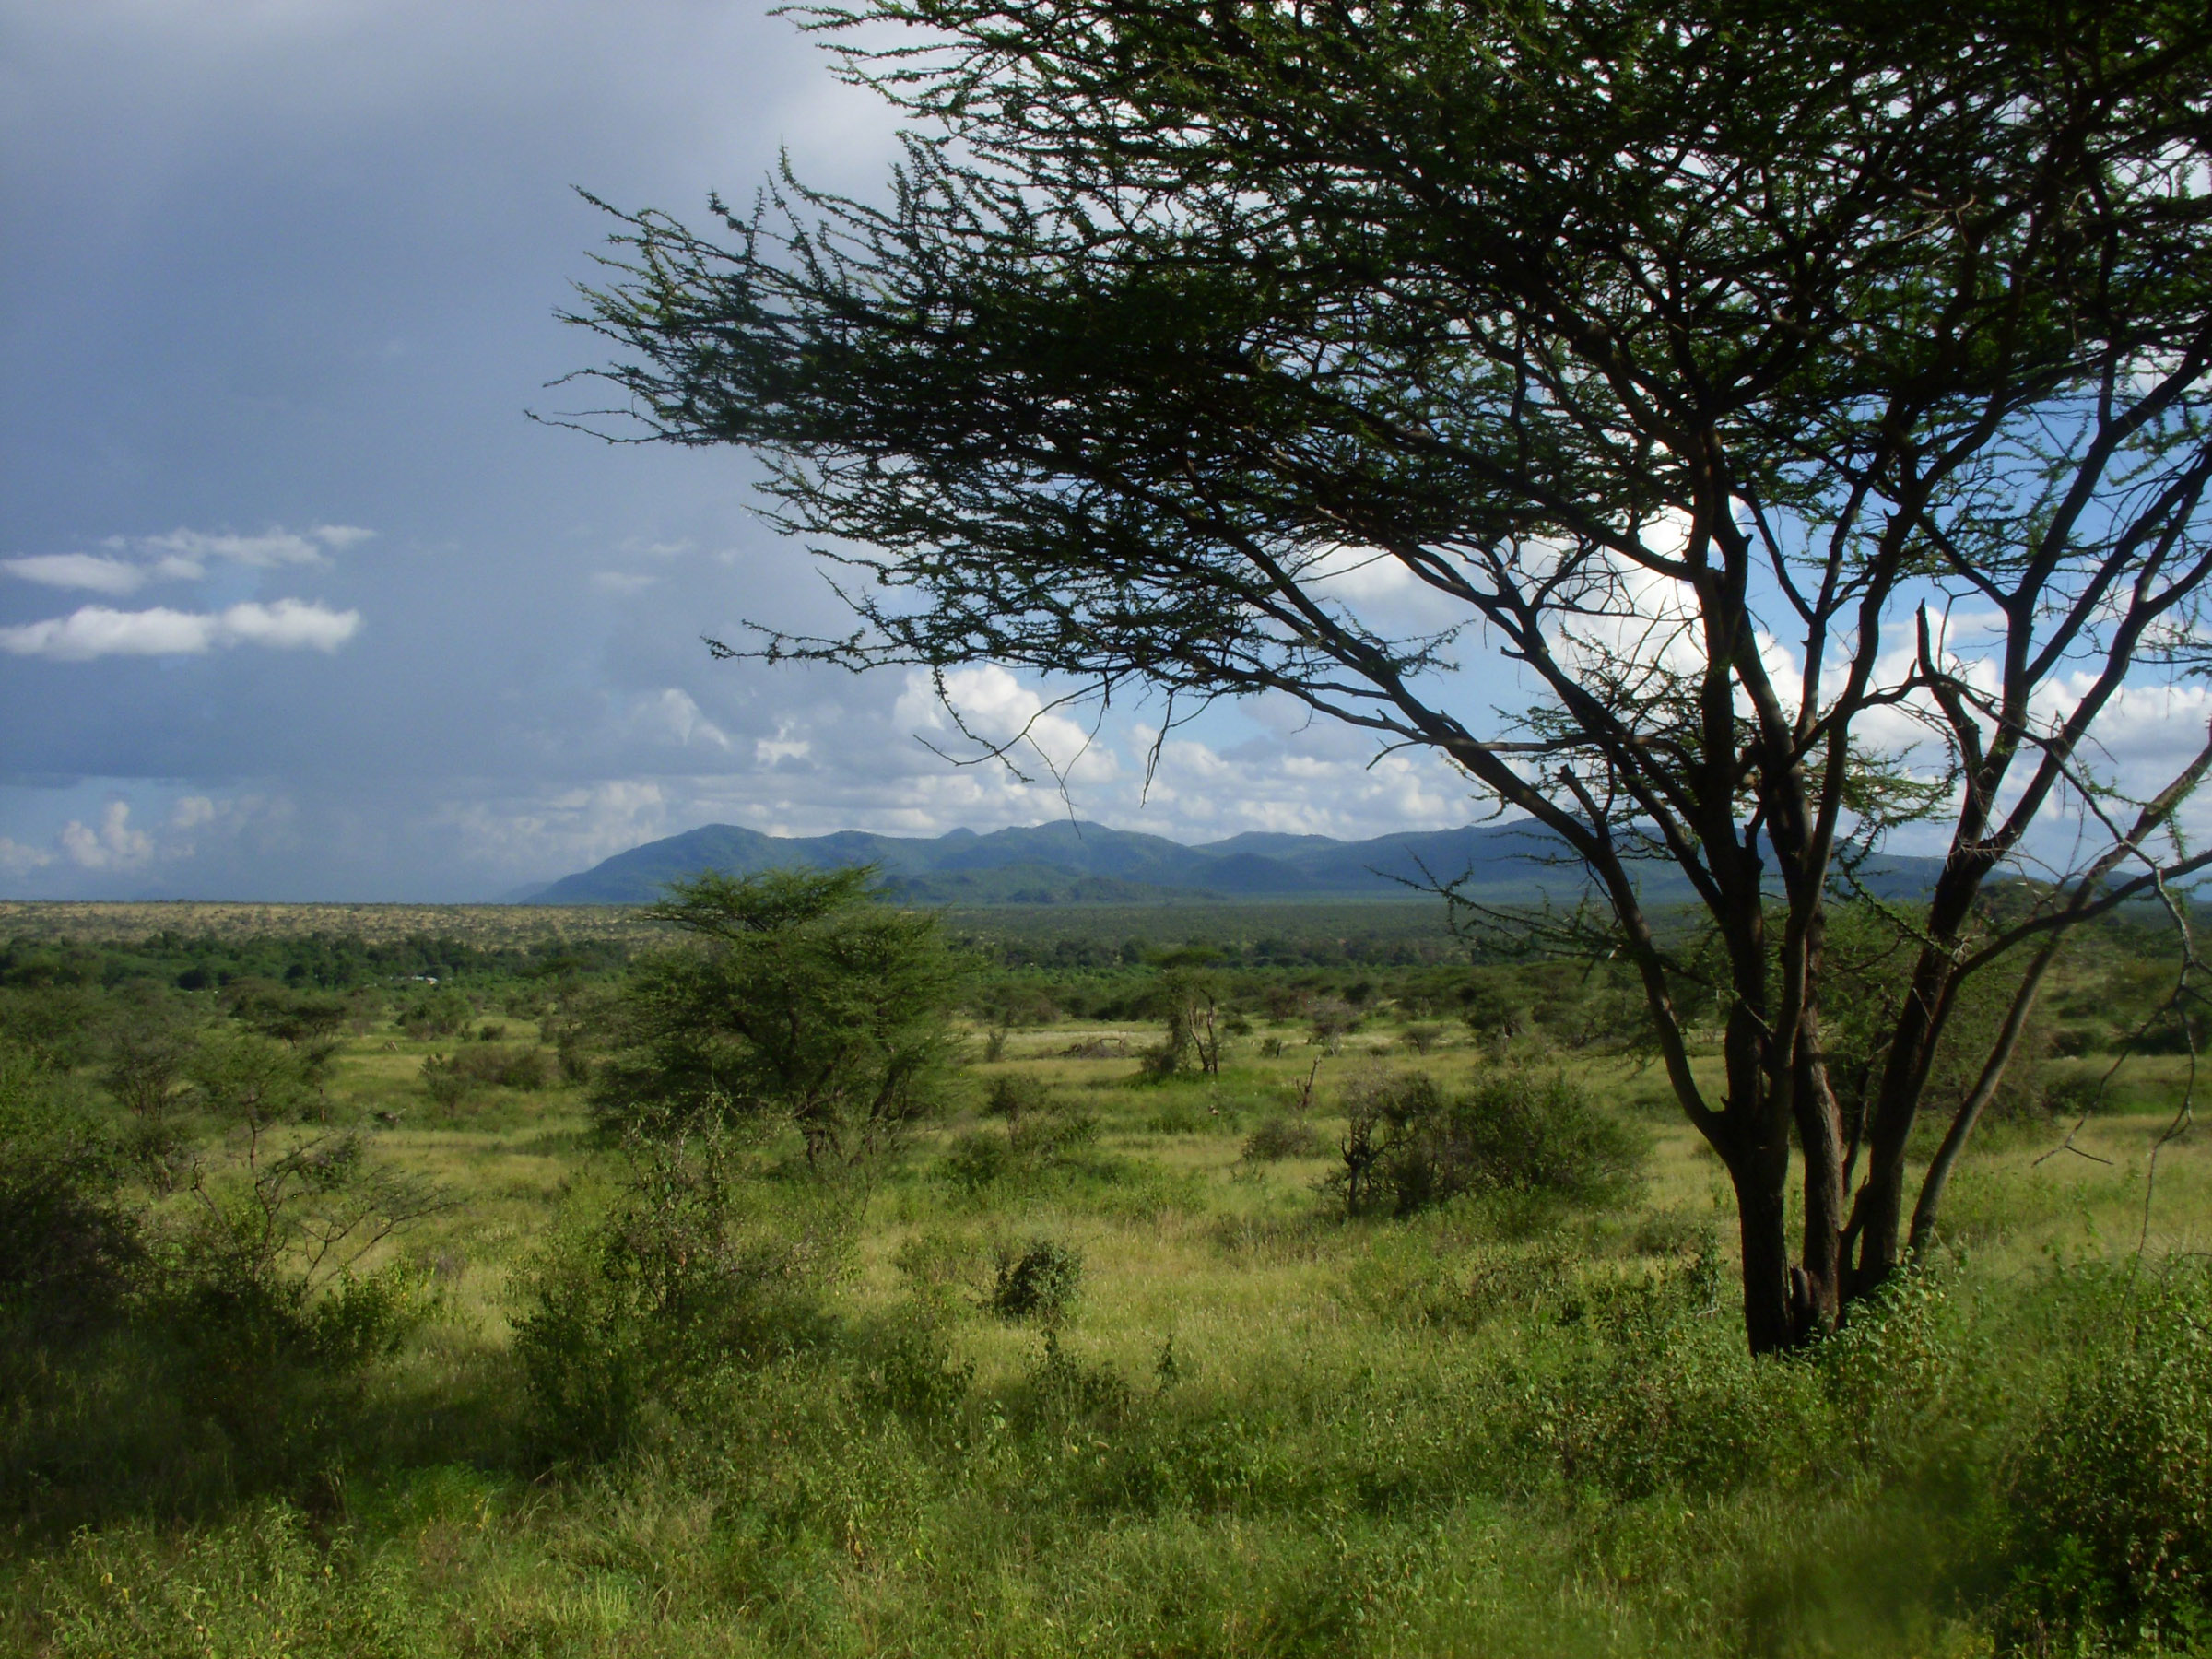 An East African savanna landscape of tree-dotted grassland is shown in this image from Samburu National Reserve in Kenya. The more heavily vegetated area in the middle distance is the corridor of the Ewaso Ngiro River. A new University of Utah study concludes that savanna was the predominant ecosystem during the evolution of human ancestors and their chimp and gorilla relatives in East Africa. Photo Credit: Thure Cerling, University of Utah.